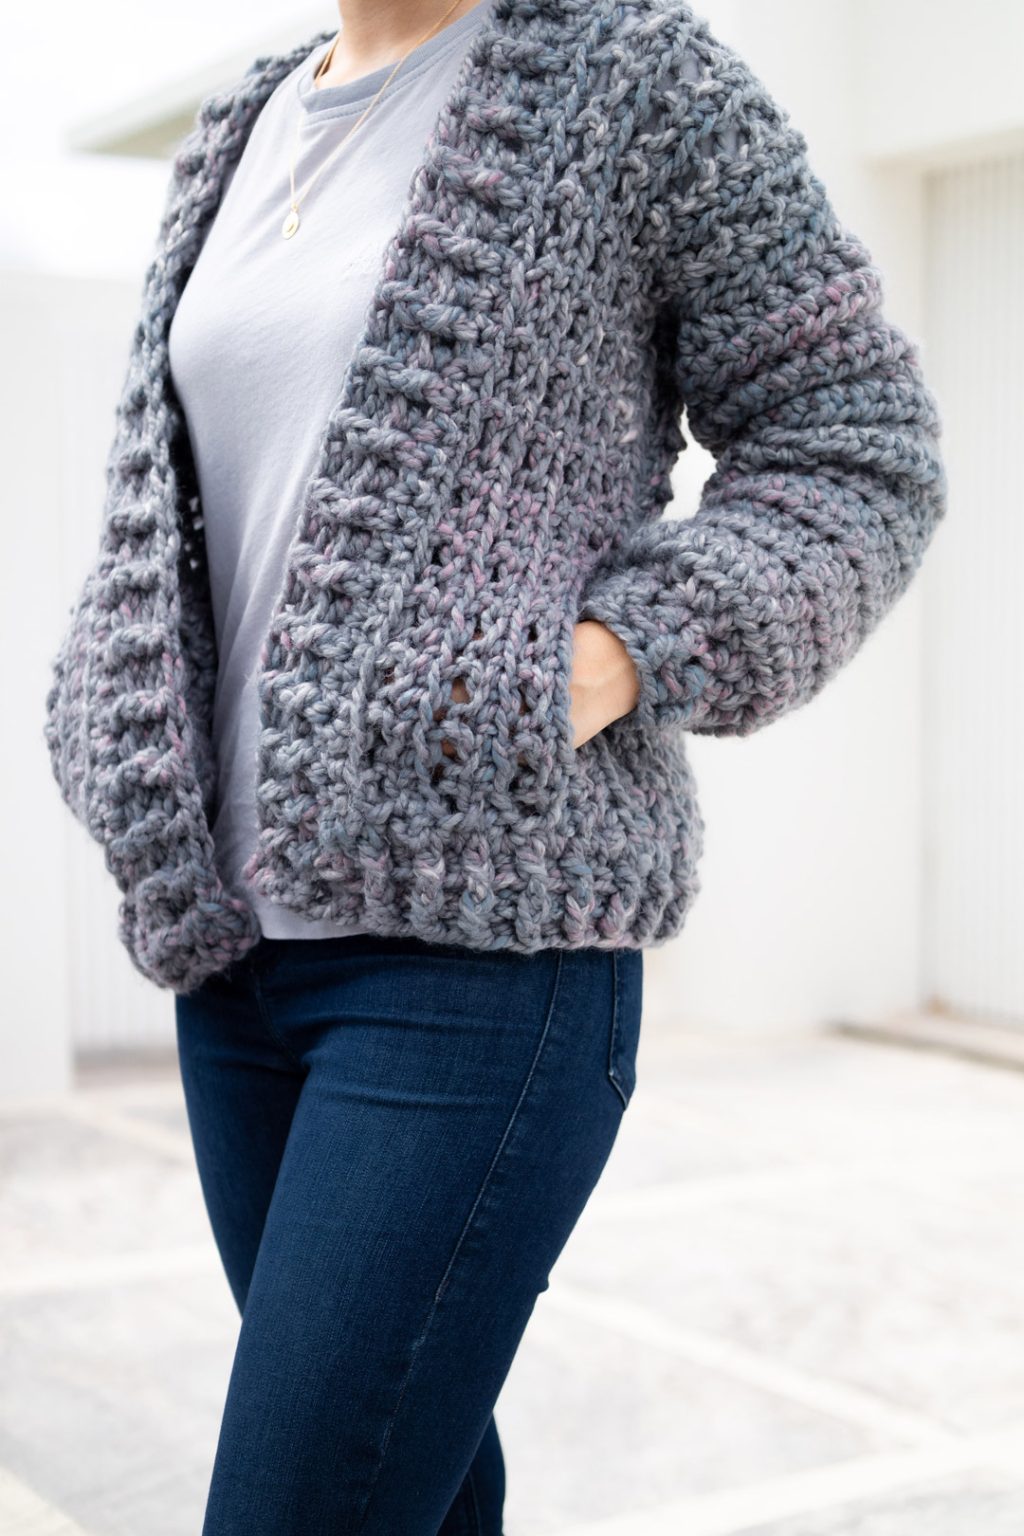 Chunky Bomber Jacket with Pockets! Free Crochet Pattern + Video Tutorial